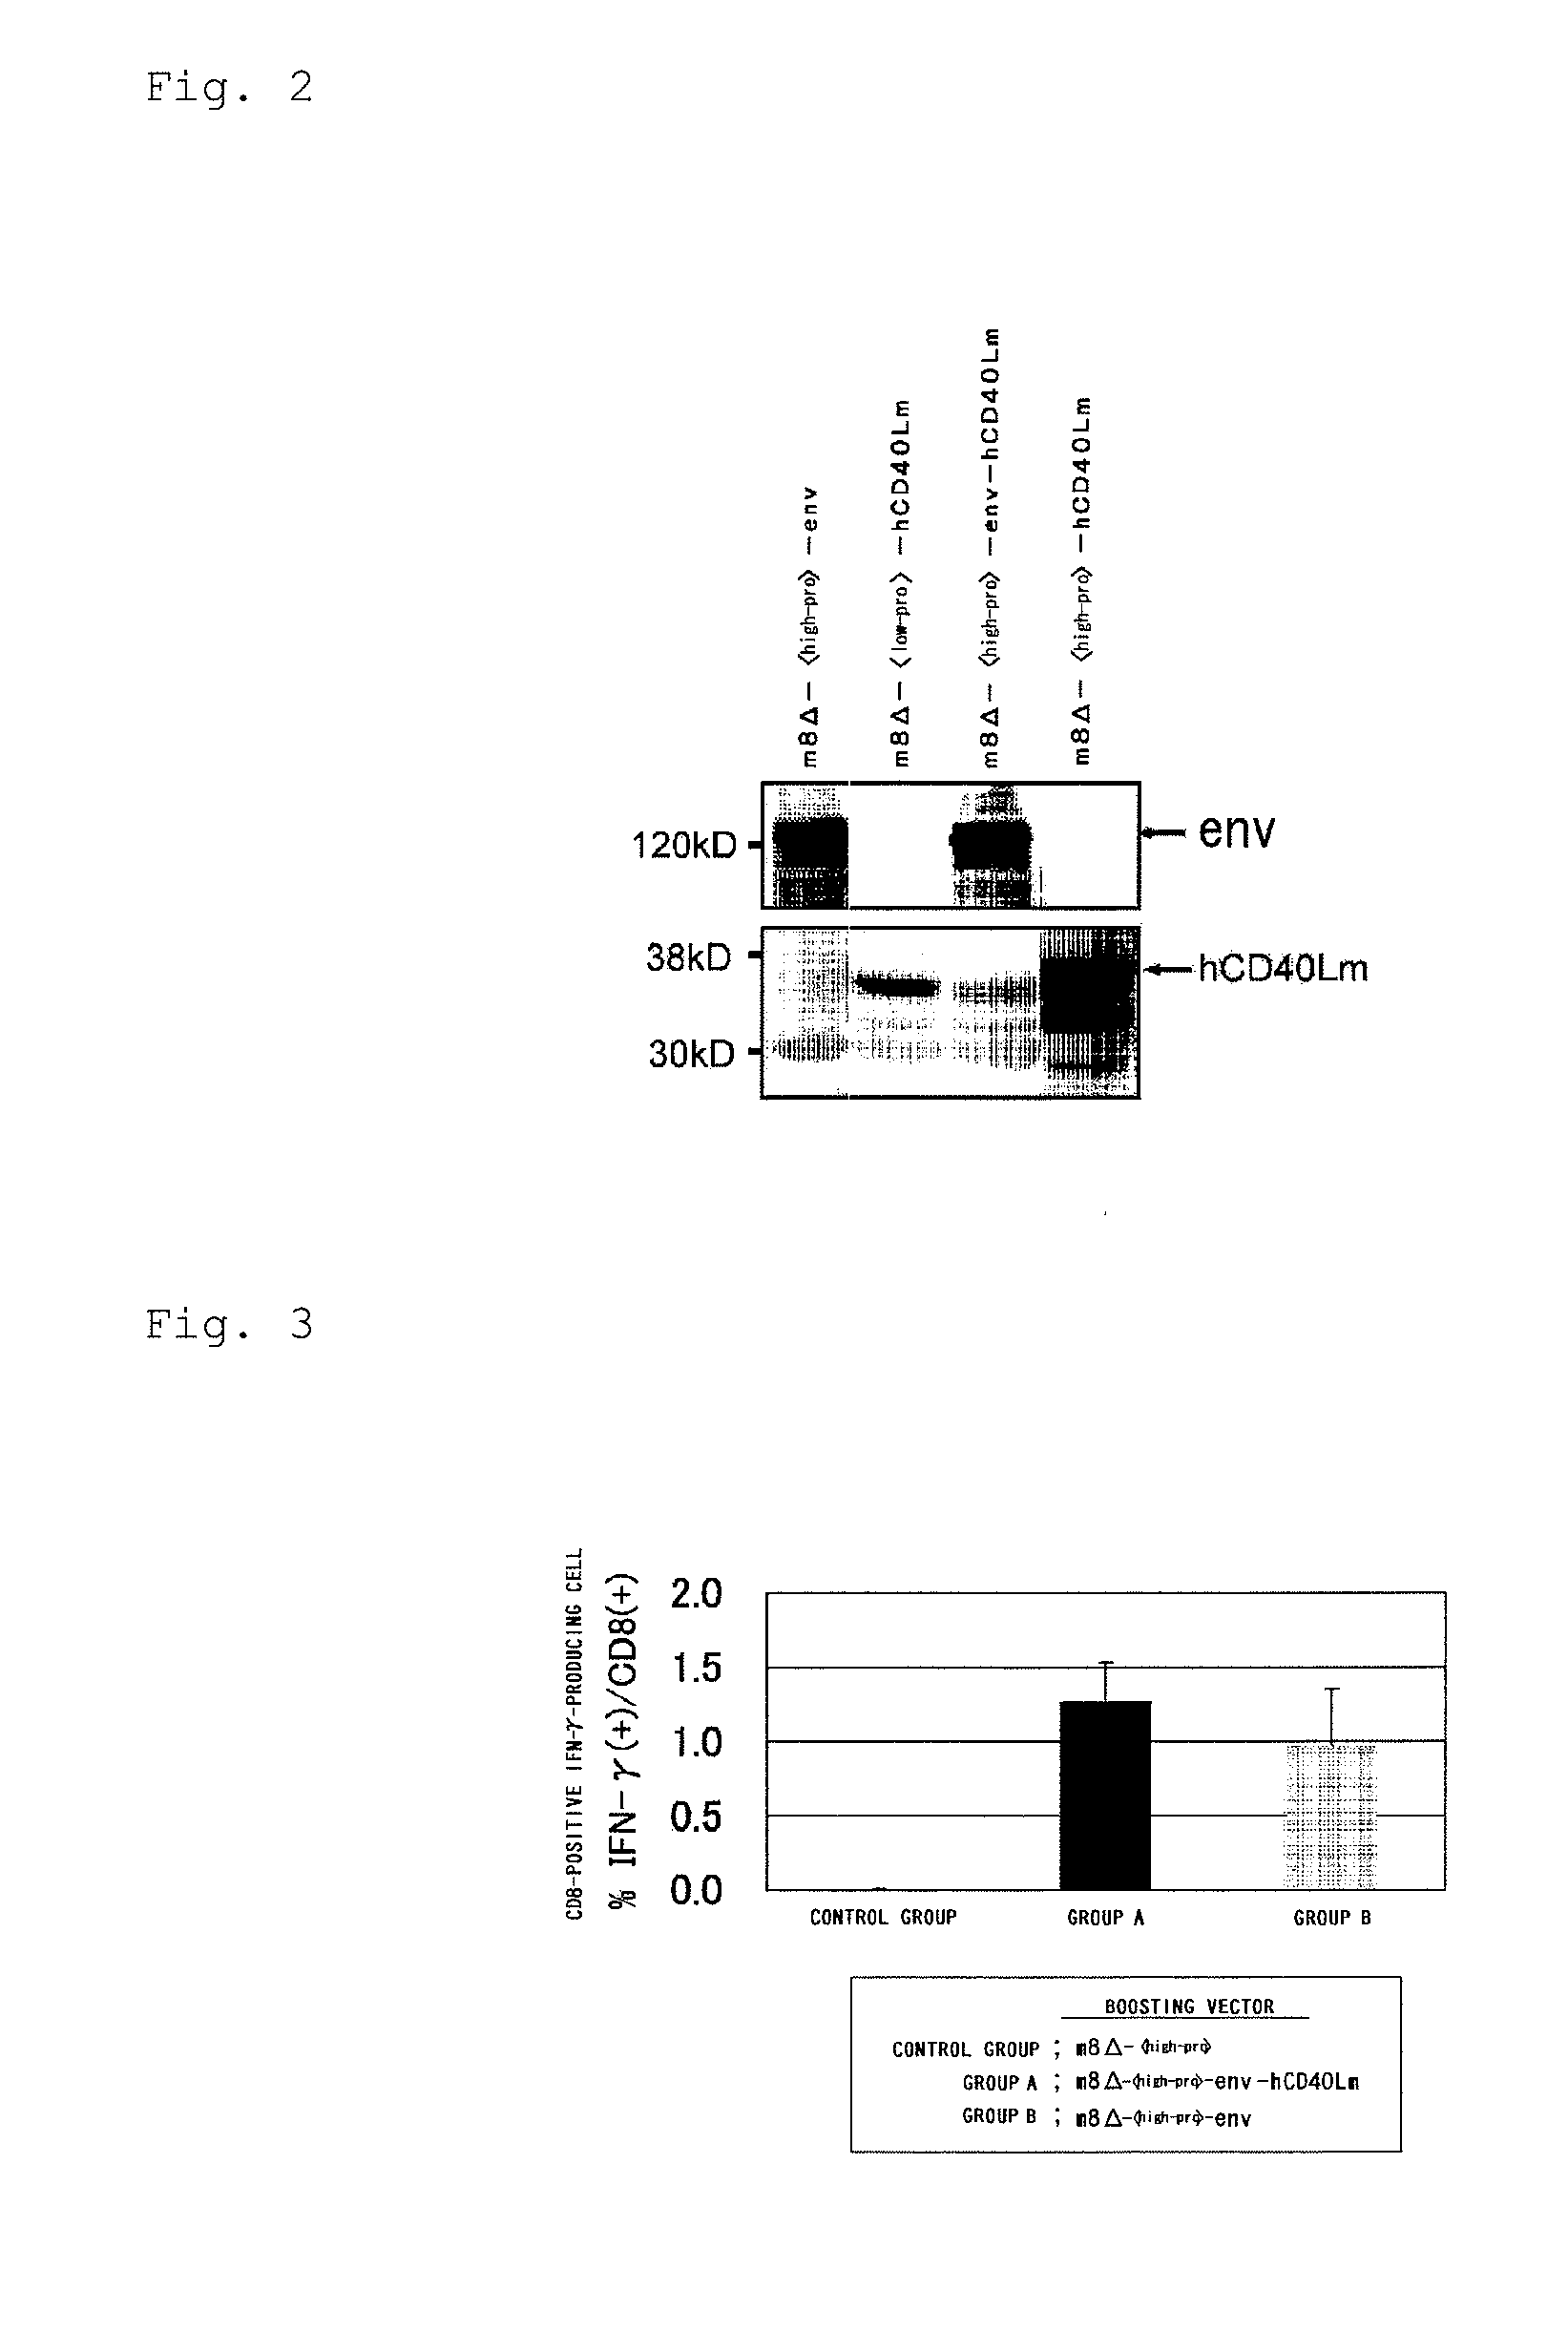 Virus vector for prime/boost vaccines, which comprises vaccinia virus vector and sendai virus vector